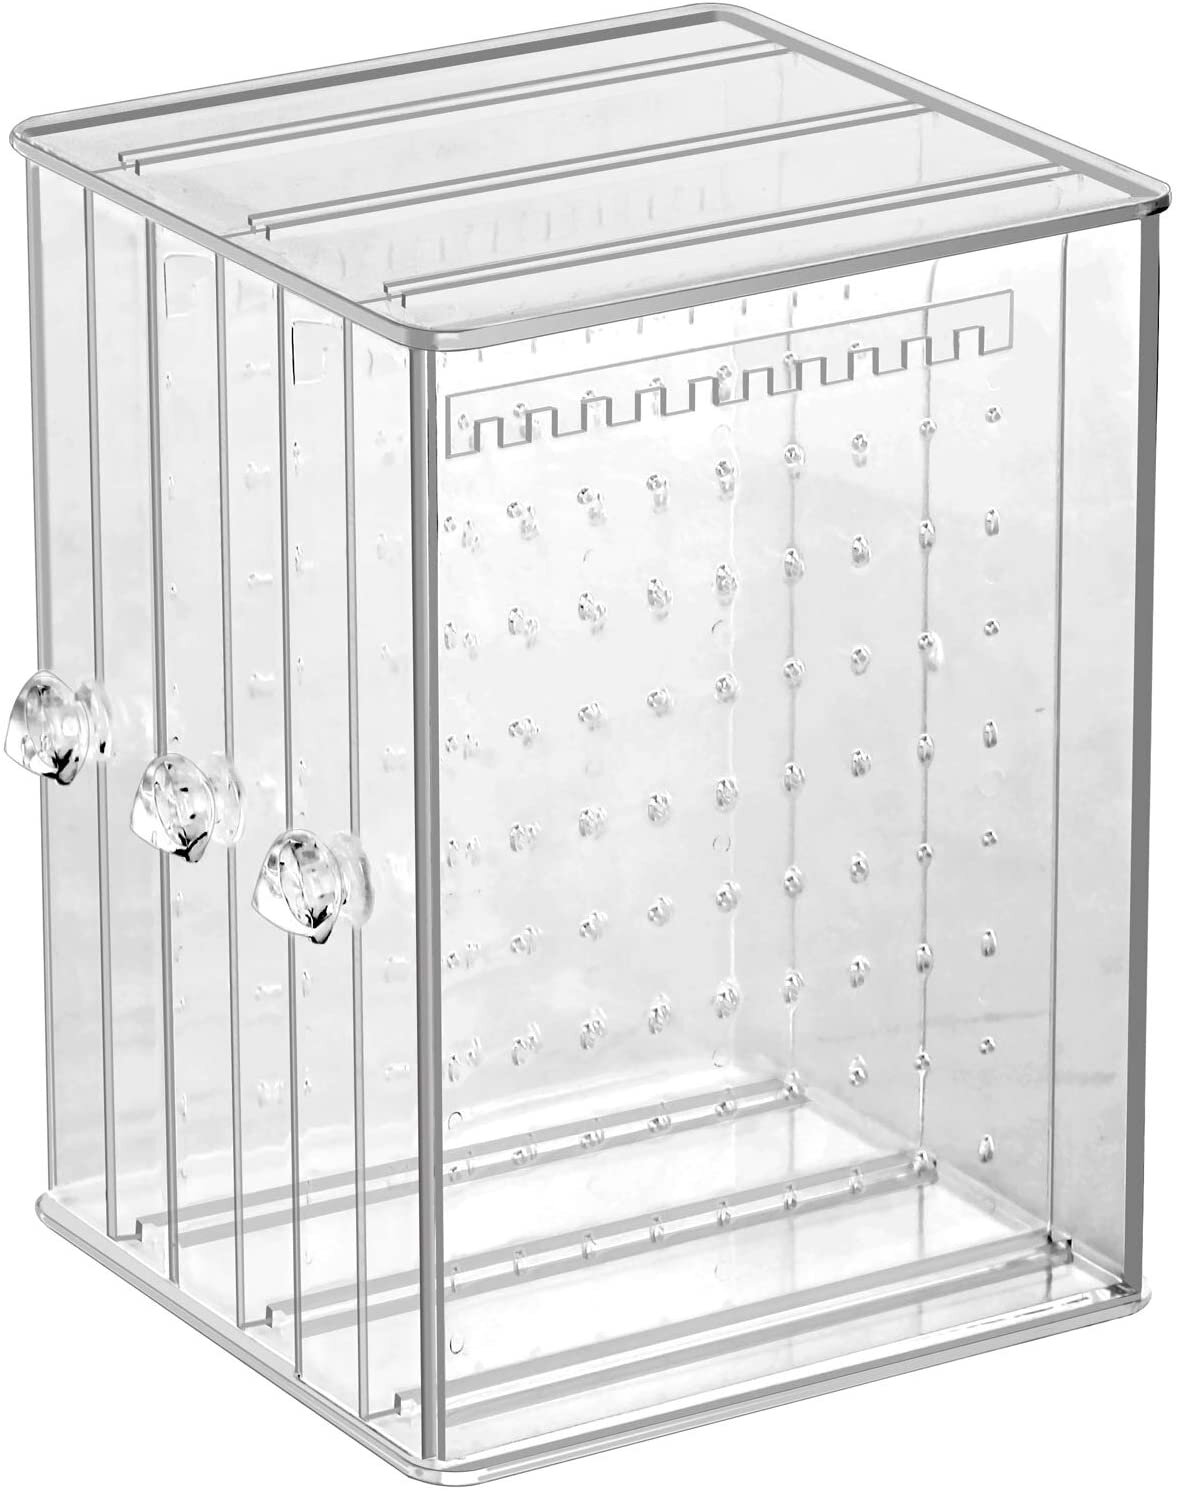 Ring Display Tray Jewelry Storage Box Show Case Organiser Earring Holder 72 Hole 